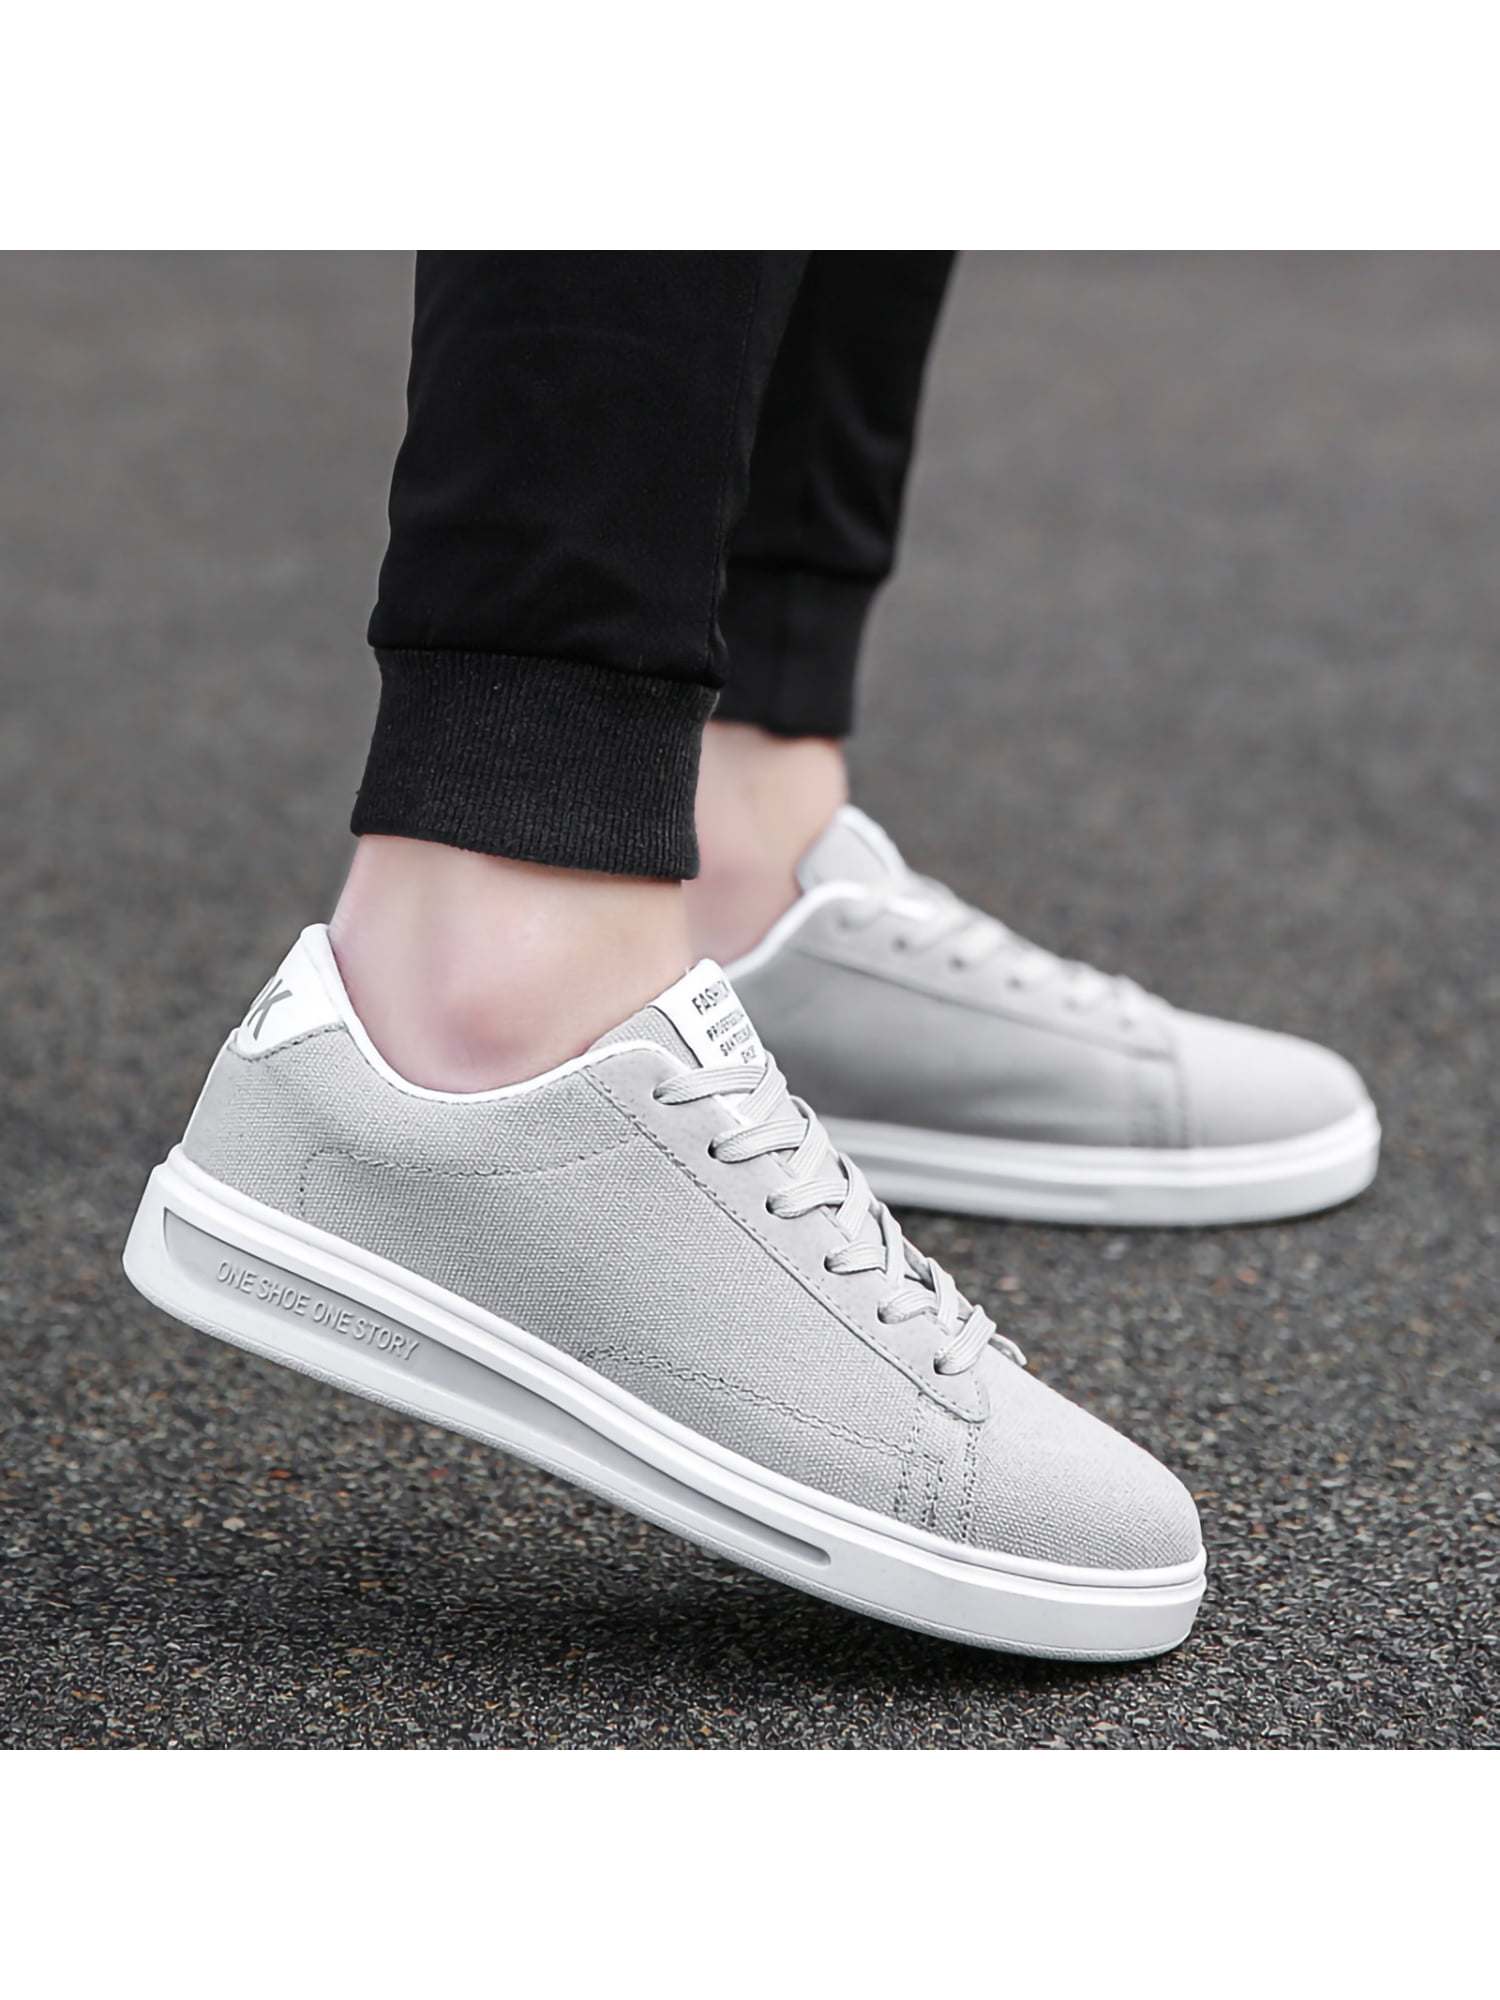 Fashion Men's Casual Sports Running Shoes Hiking Sneakers Breathable Canvas Flat